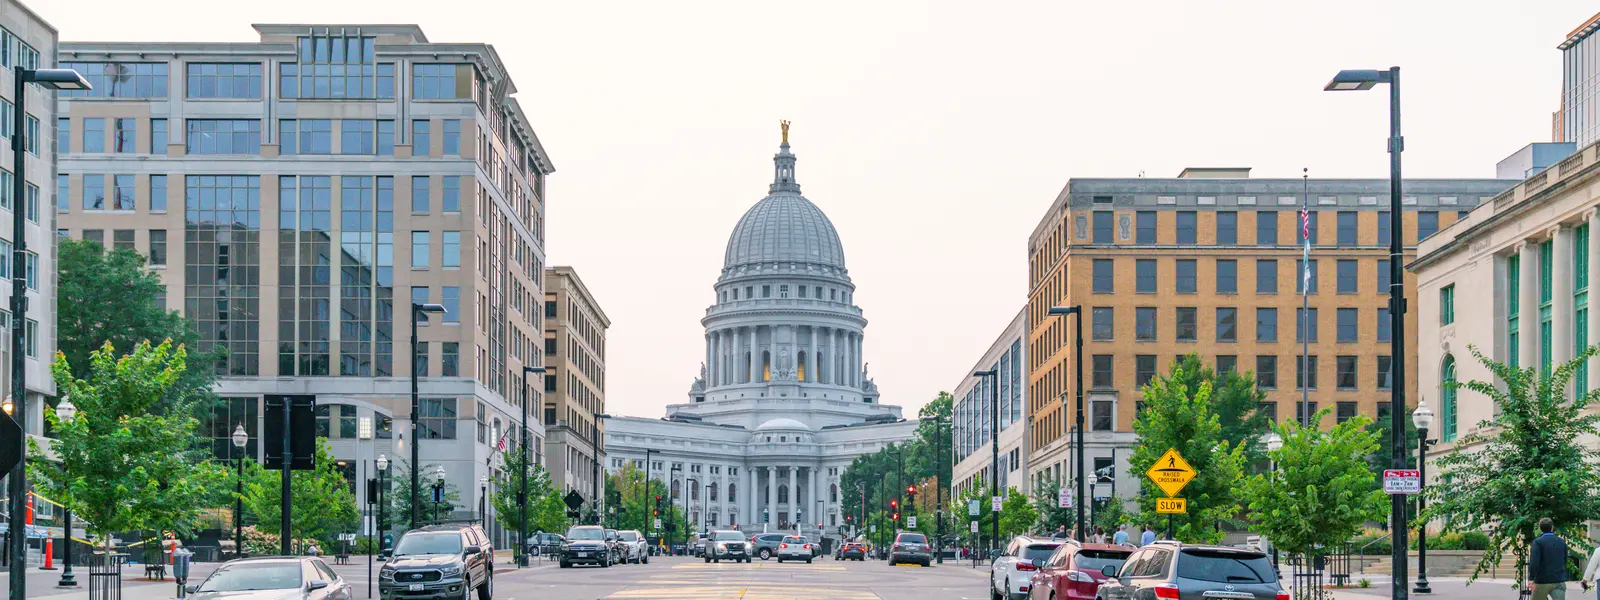 Downtown Madison facing the capitol building